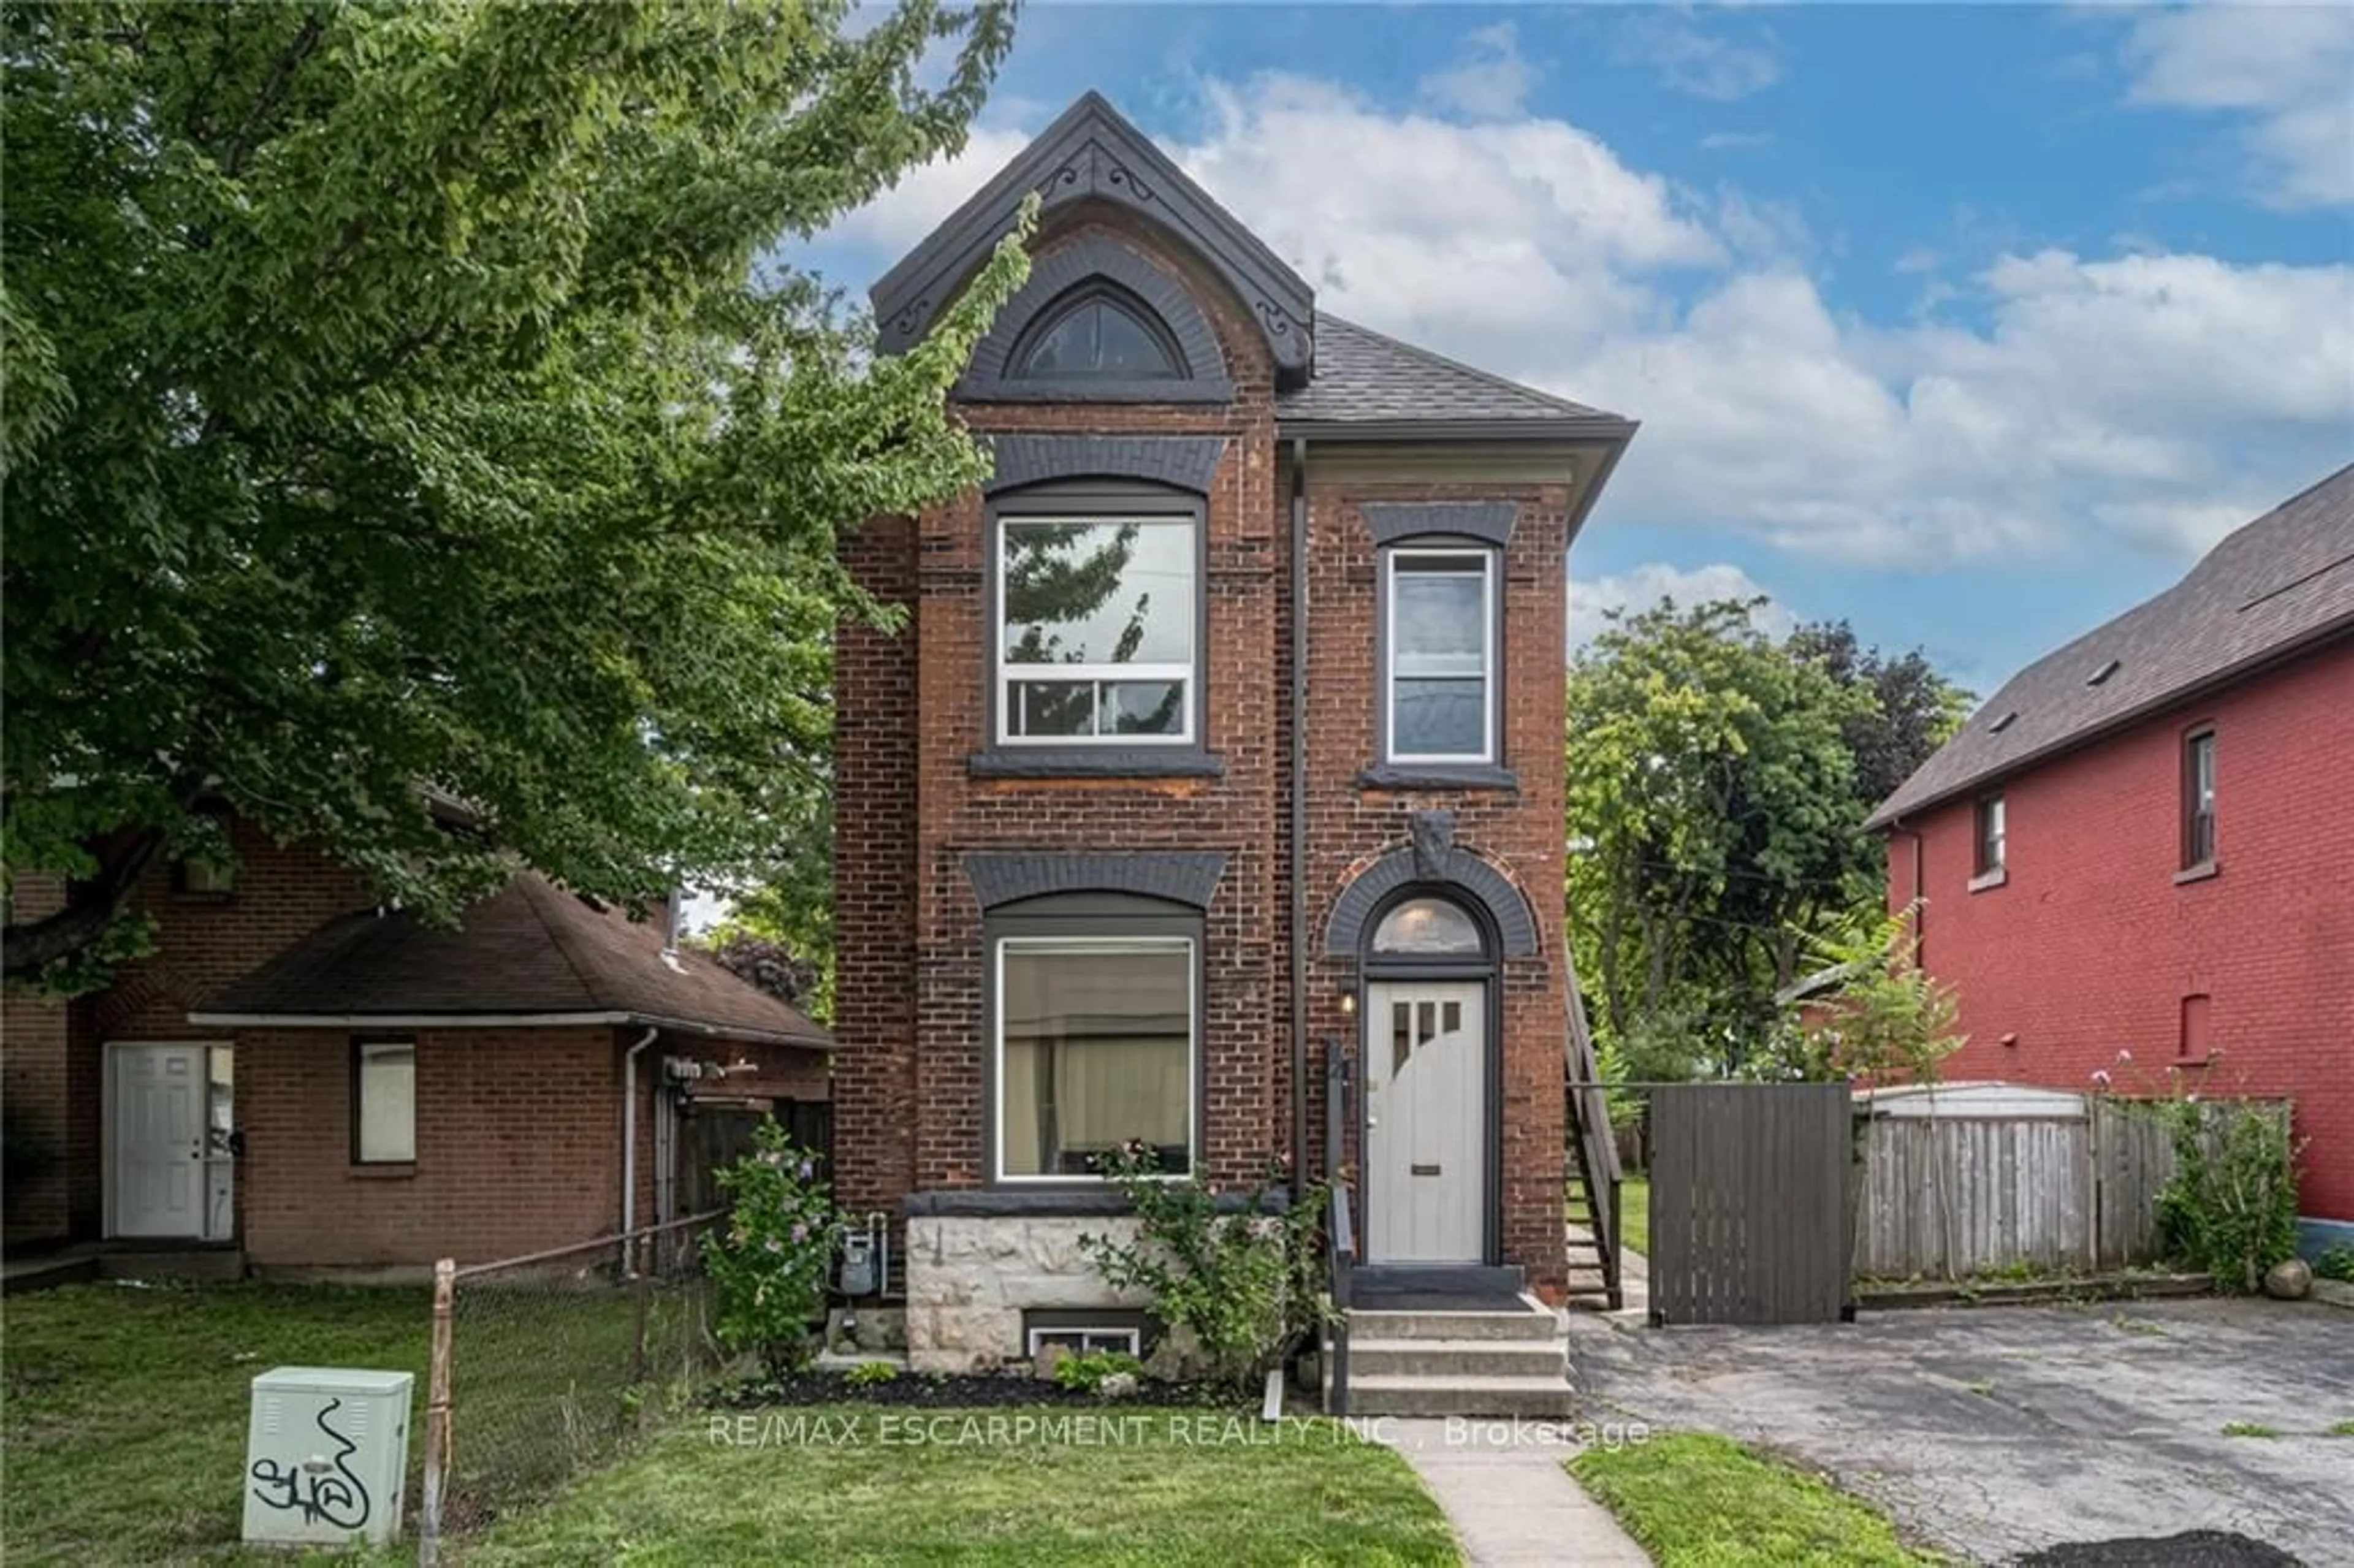 Home with brick exterior material for 92 Ashley St, Hamilton Ontario L8L 5T1